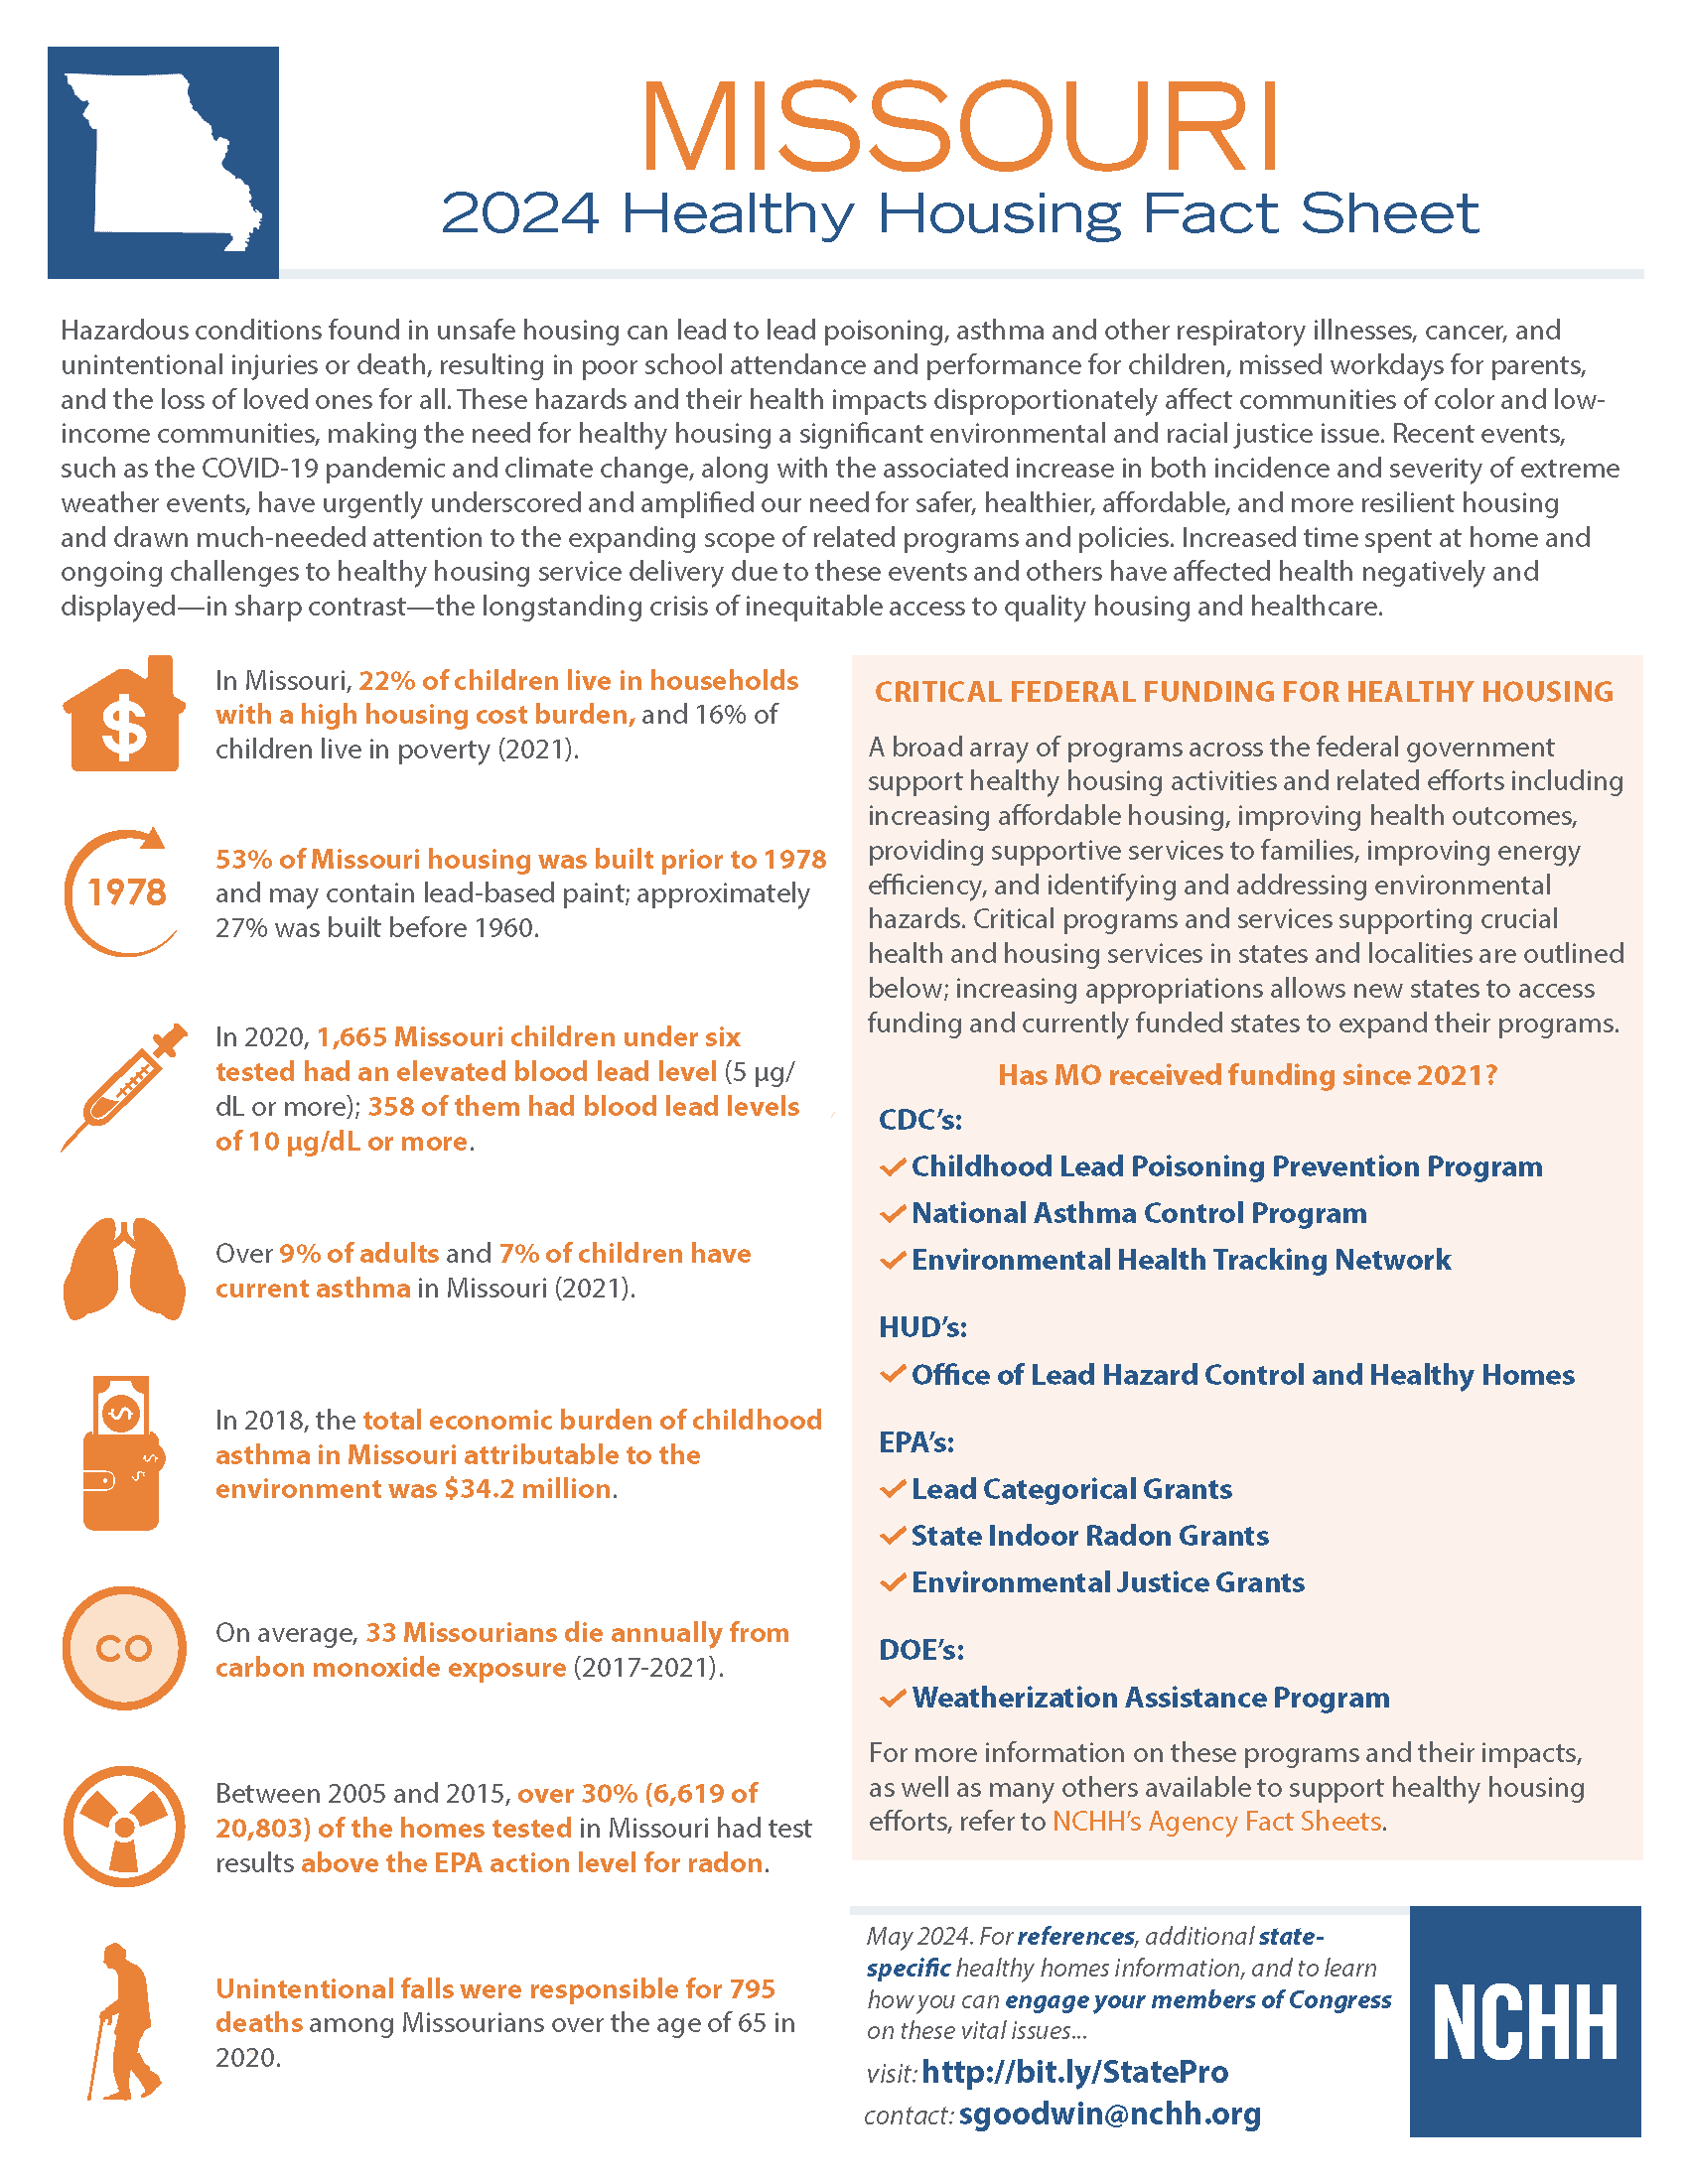 Fact sheet describing the overall environmental health of the state of Missouri.